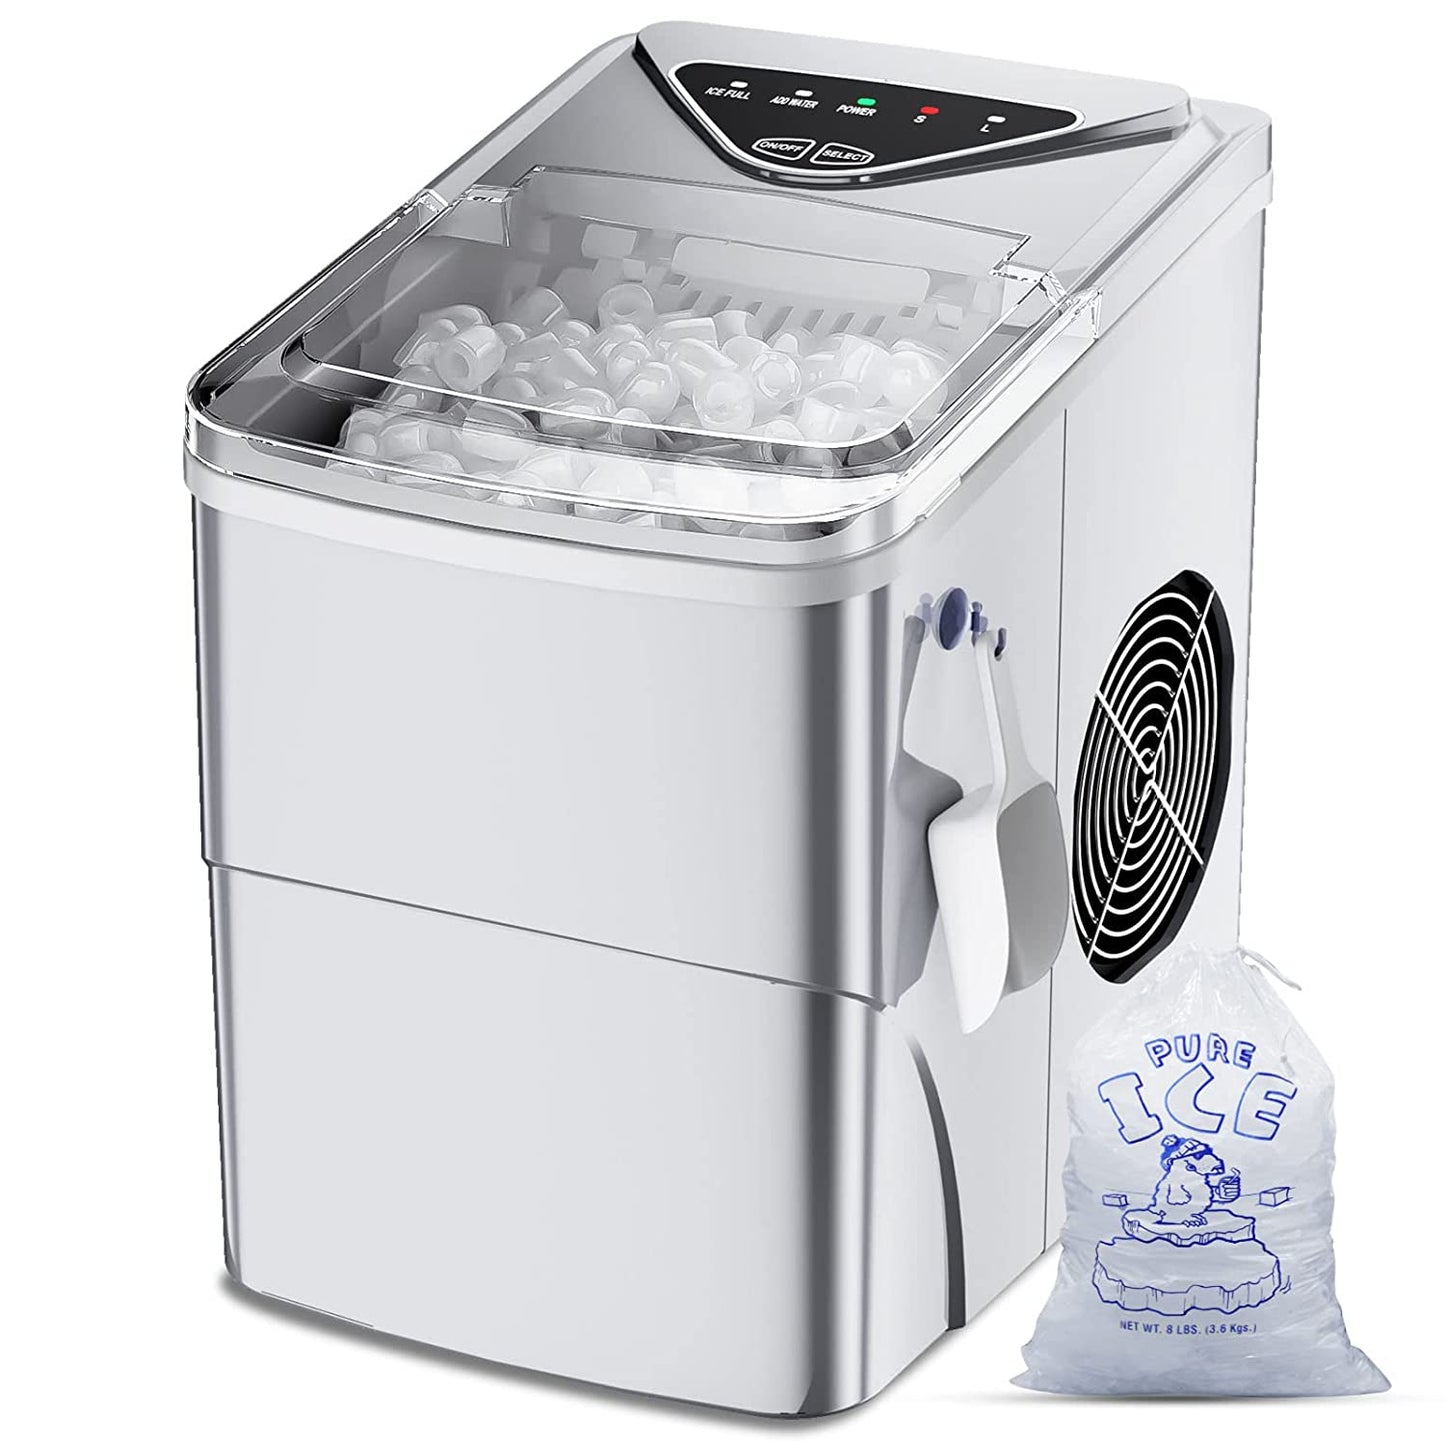 Portable Self-Cleaning Countertop Ice Maker with 9 Pebble Ice Cubes in 6 Minutes - 26Lbs Capacity - Ideal for Home, Bar, Camping, and RV (Silver)